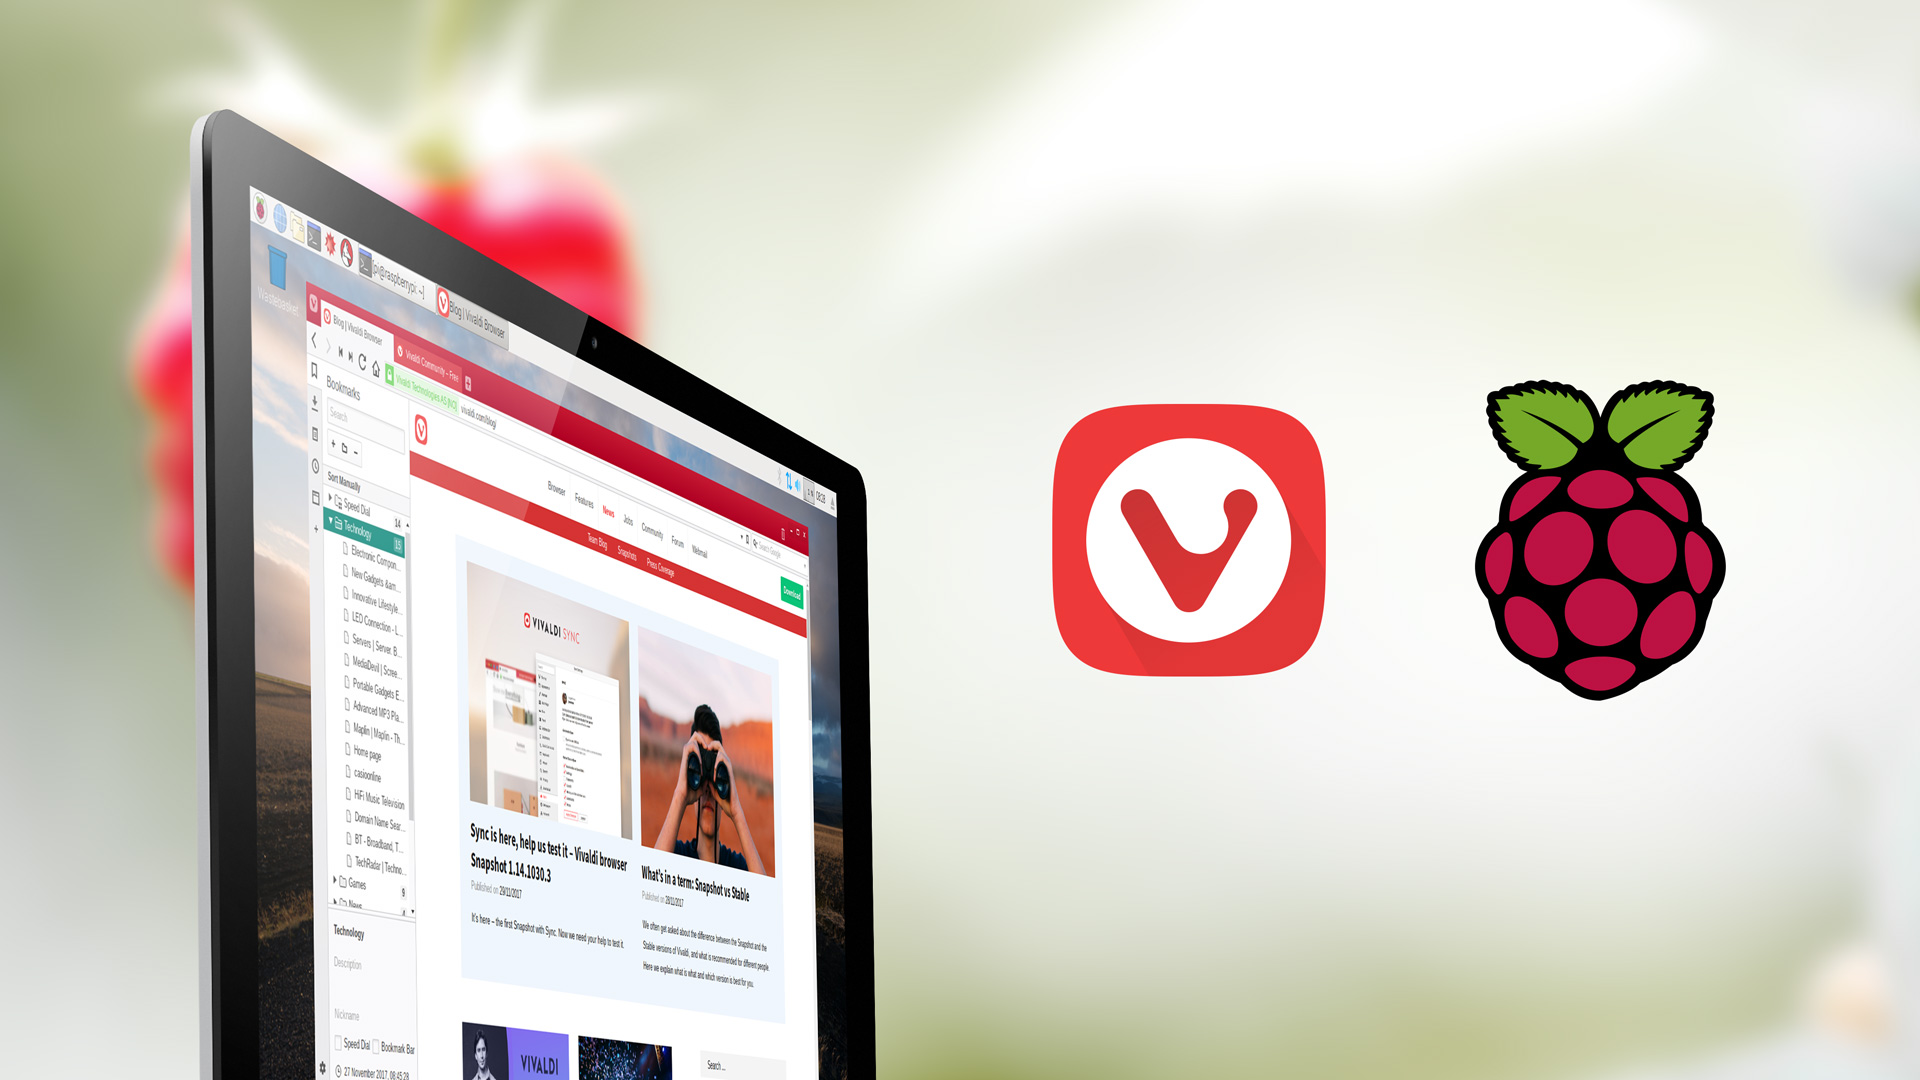 The Vivaldi browser is available on Raspberry Pi